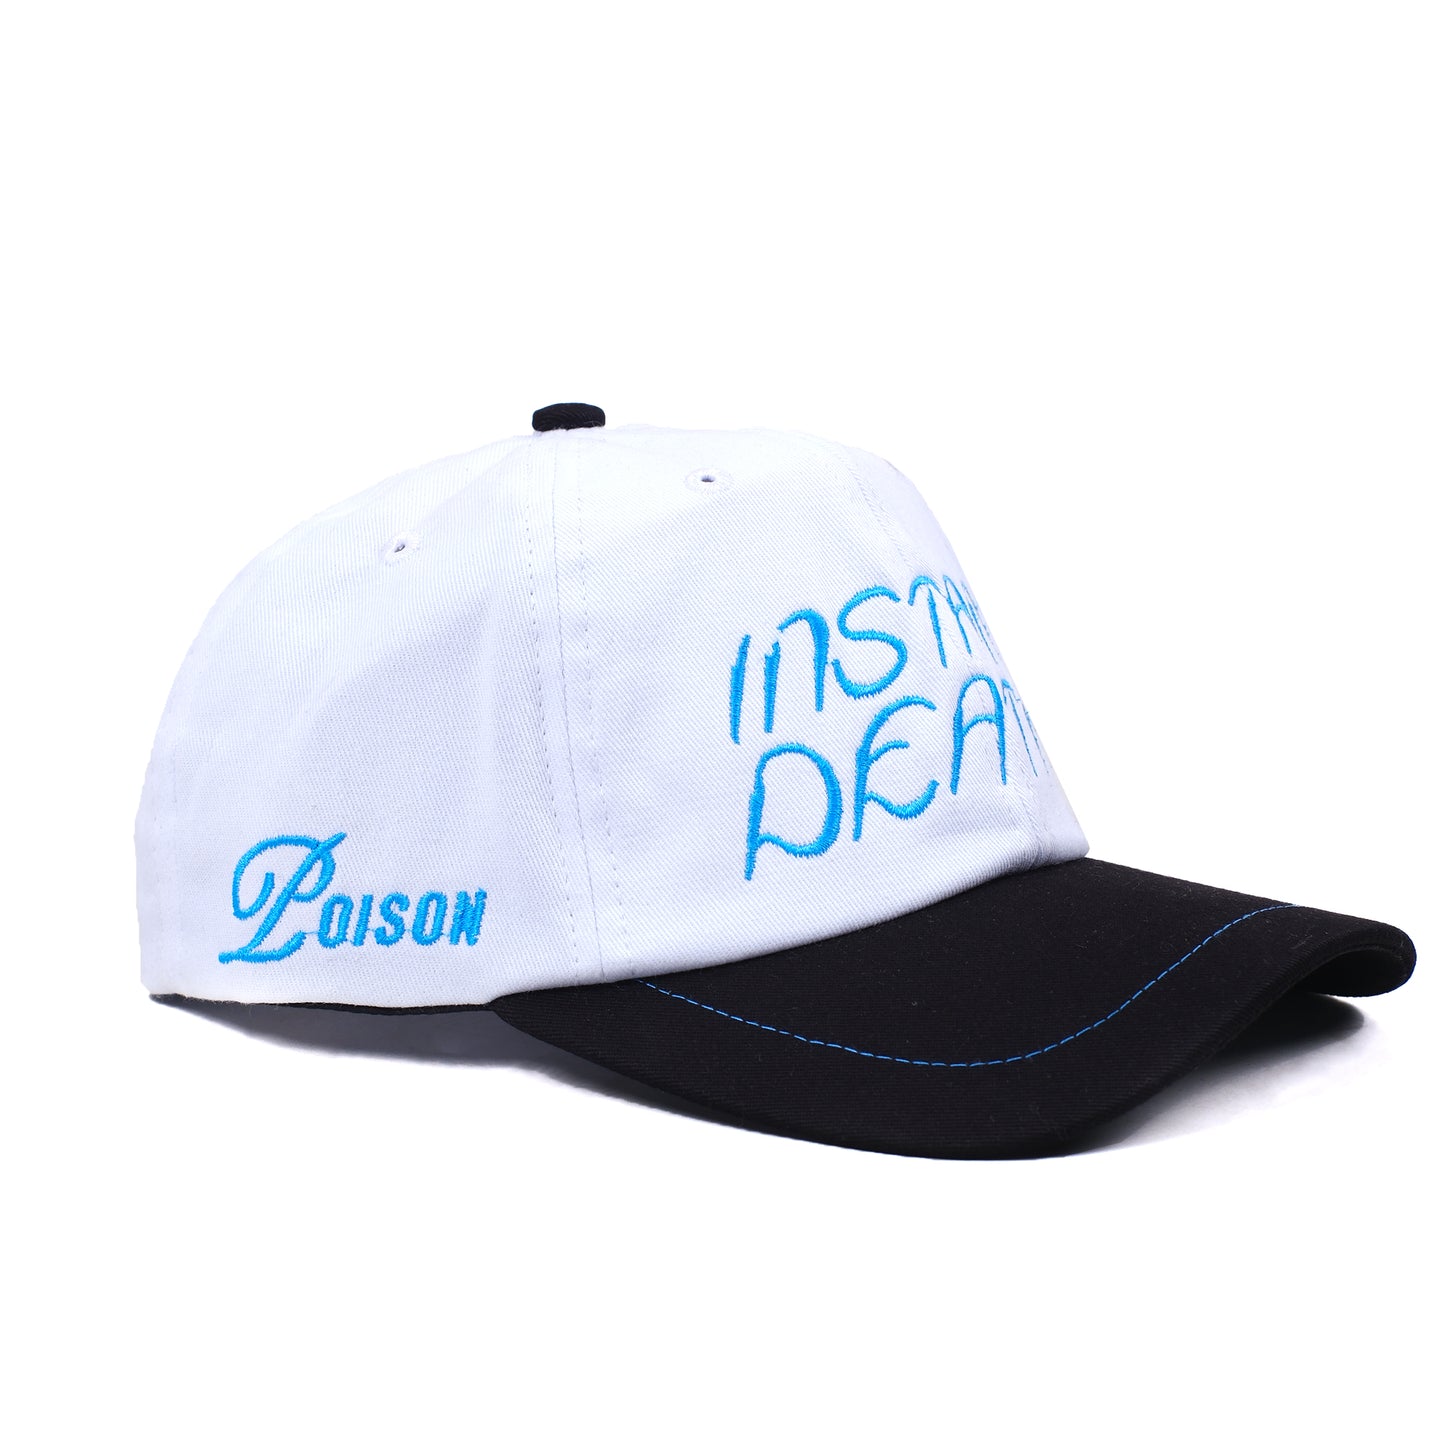 Instant Death Snapback